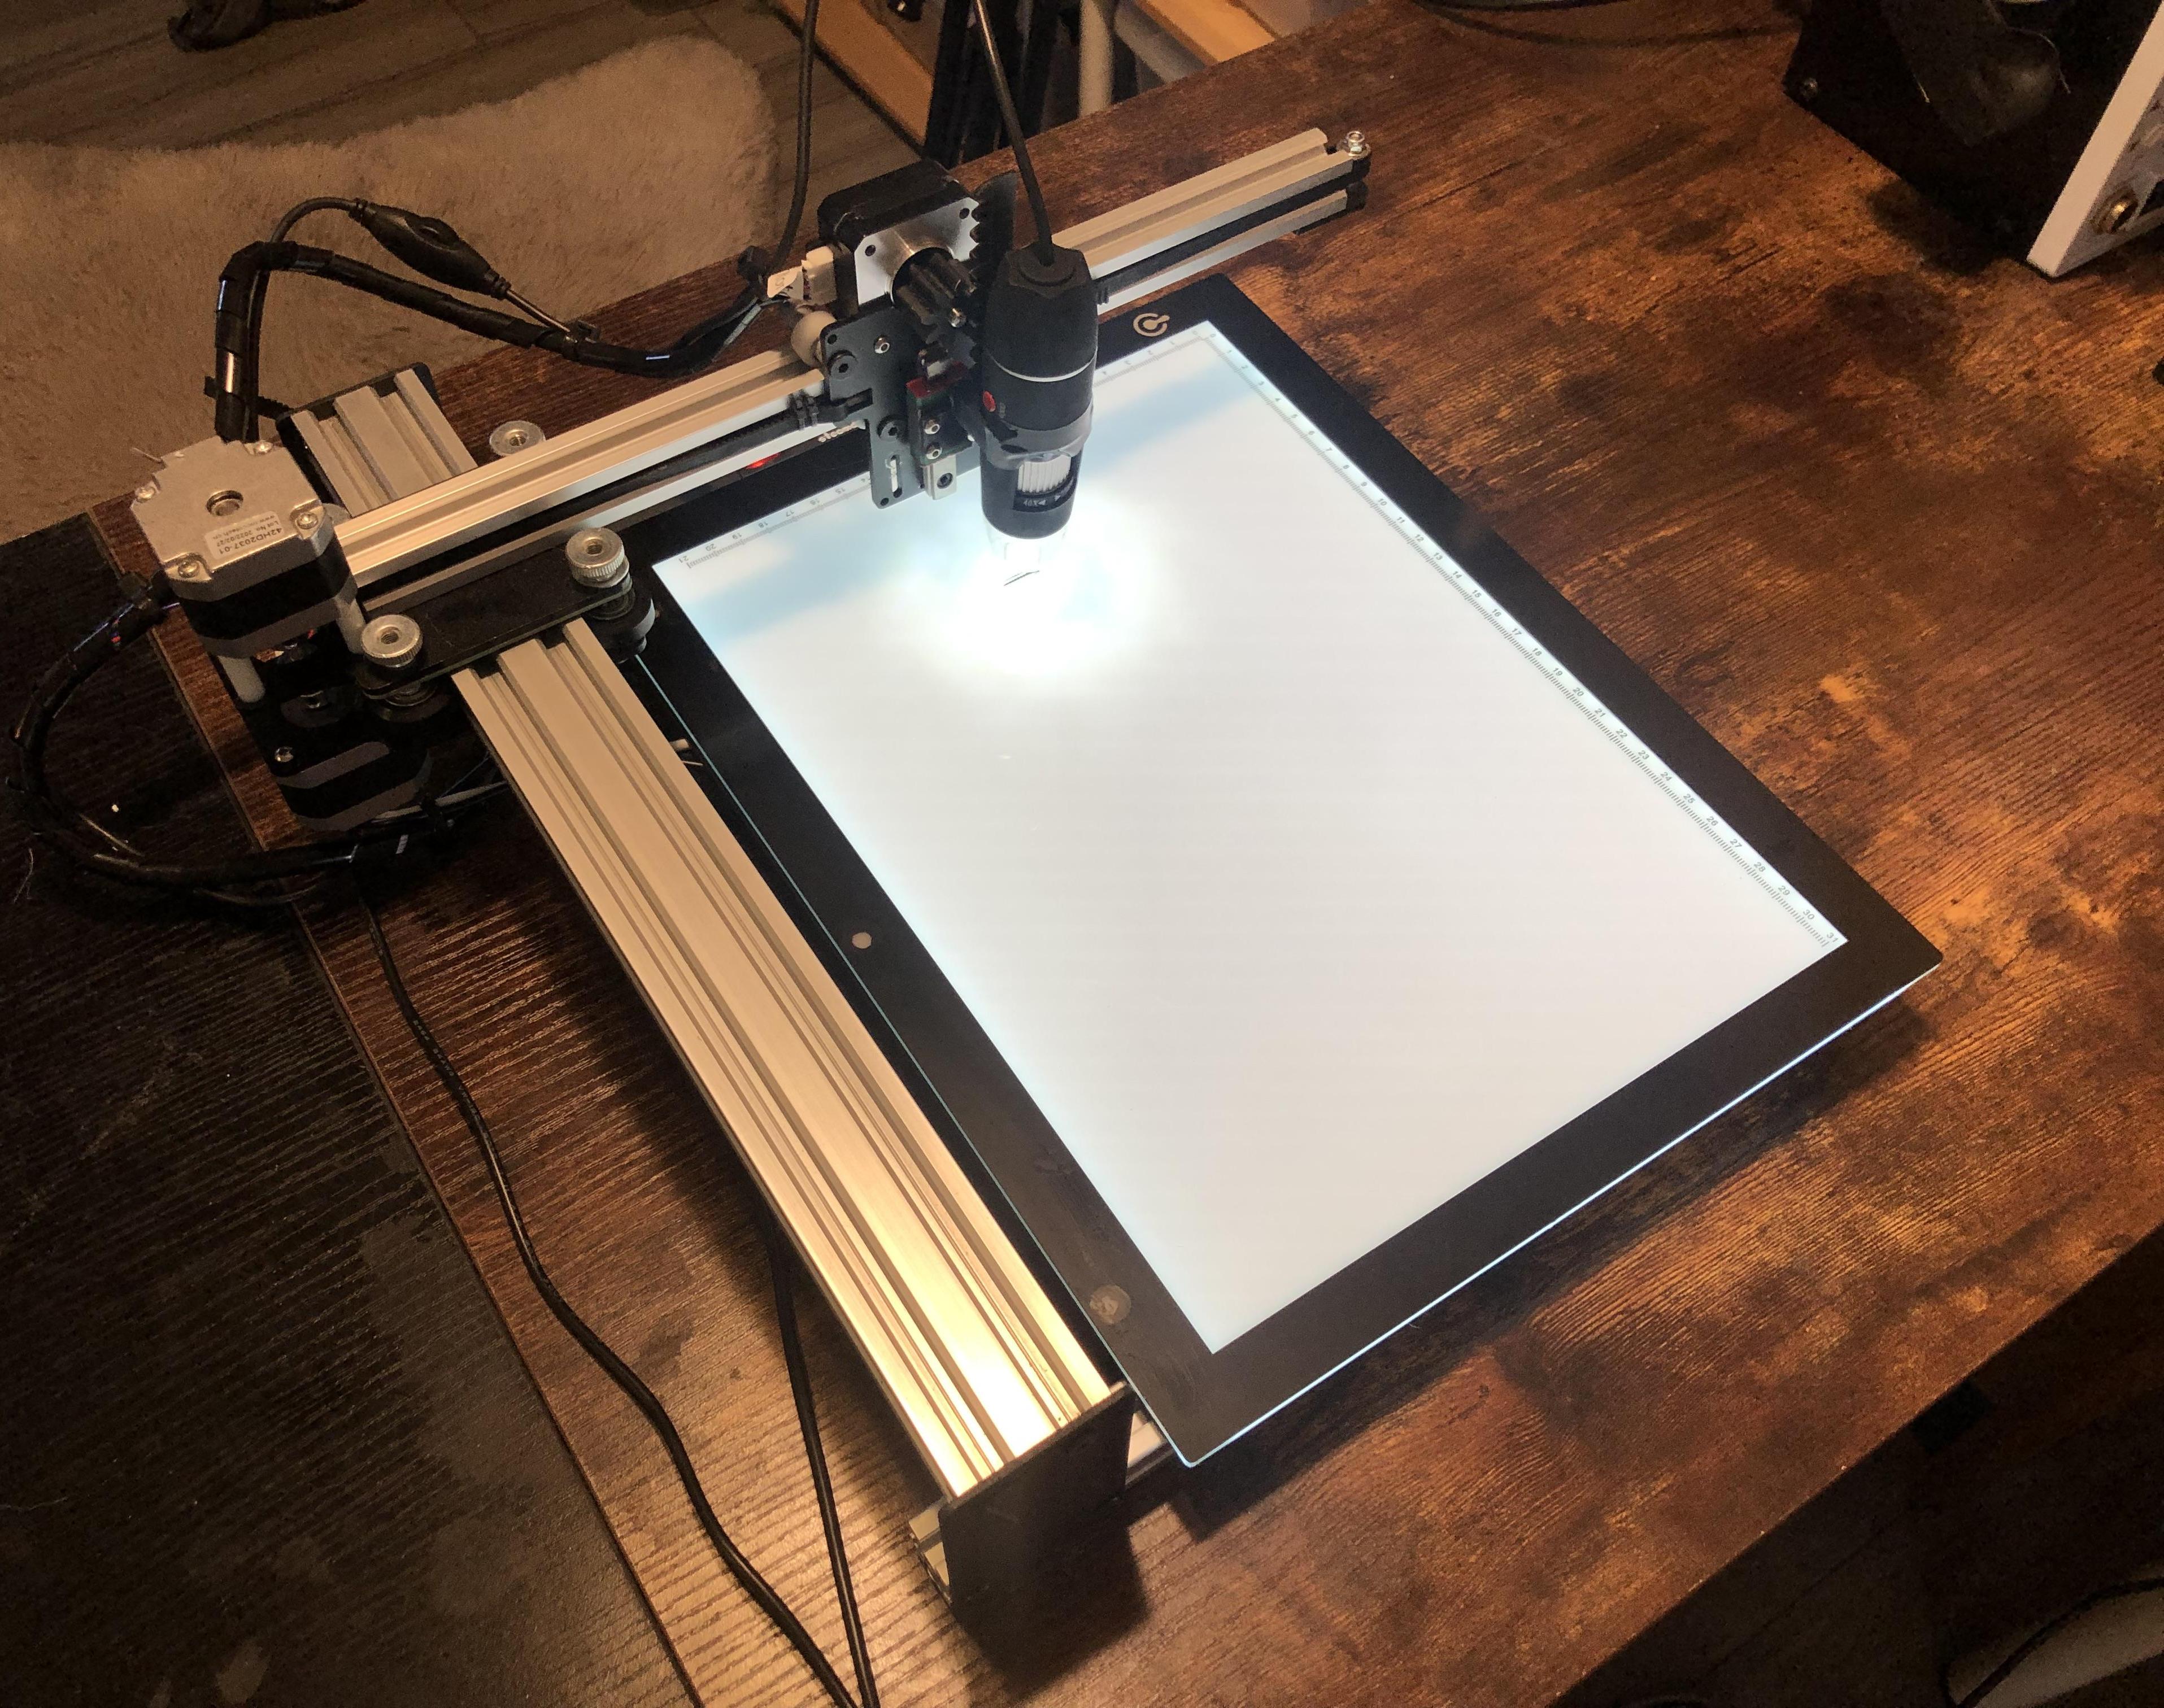 Comparatron - an Affordable Digital Optical Comparator for Reverse-engineering